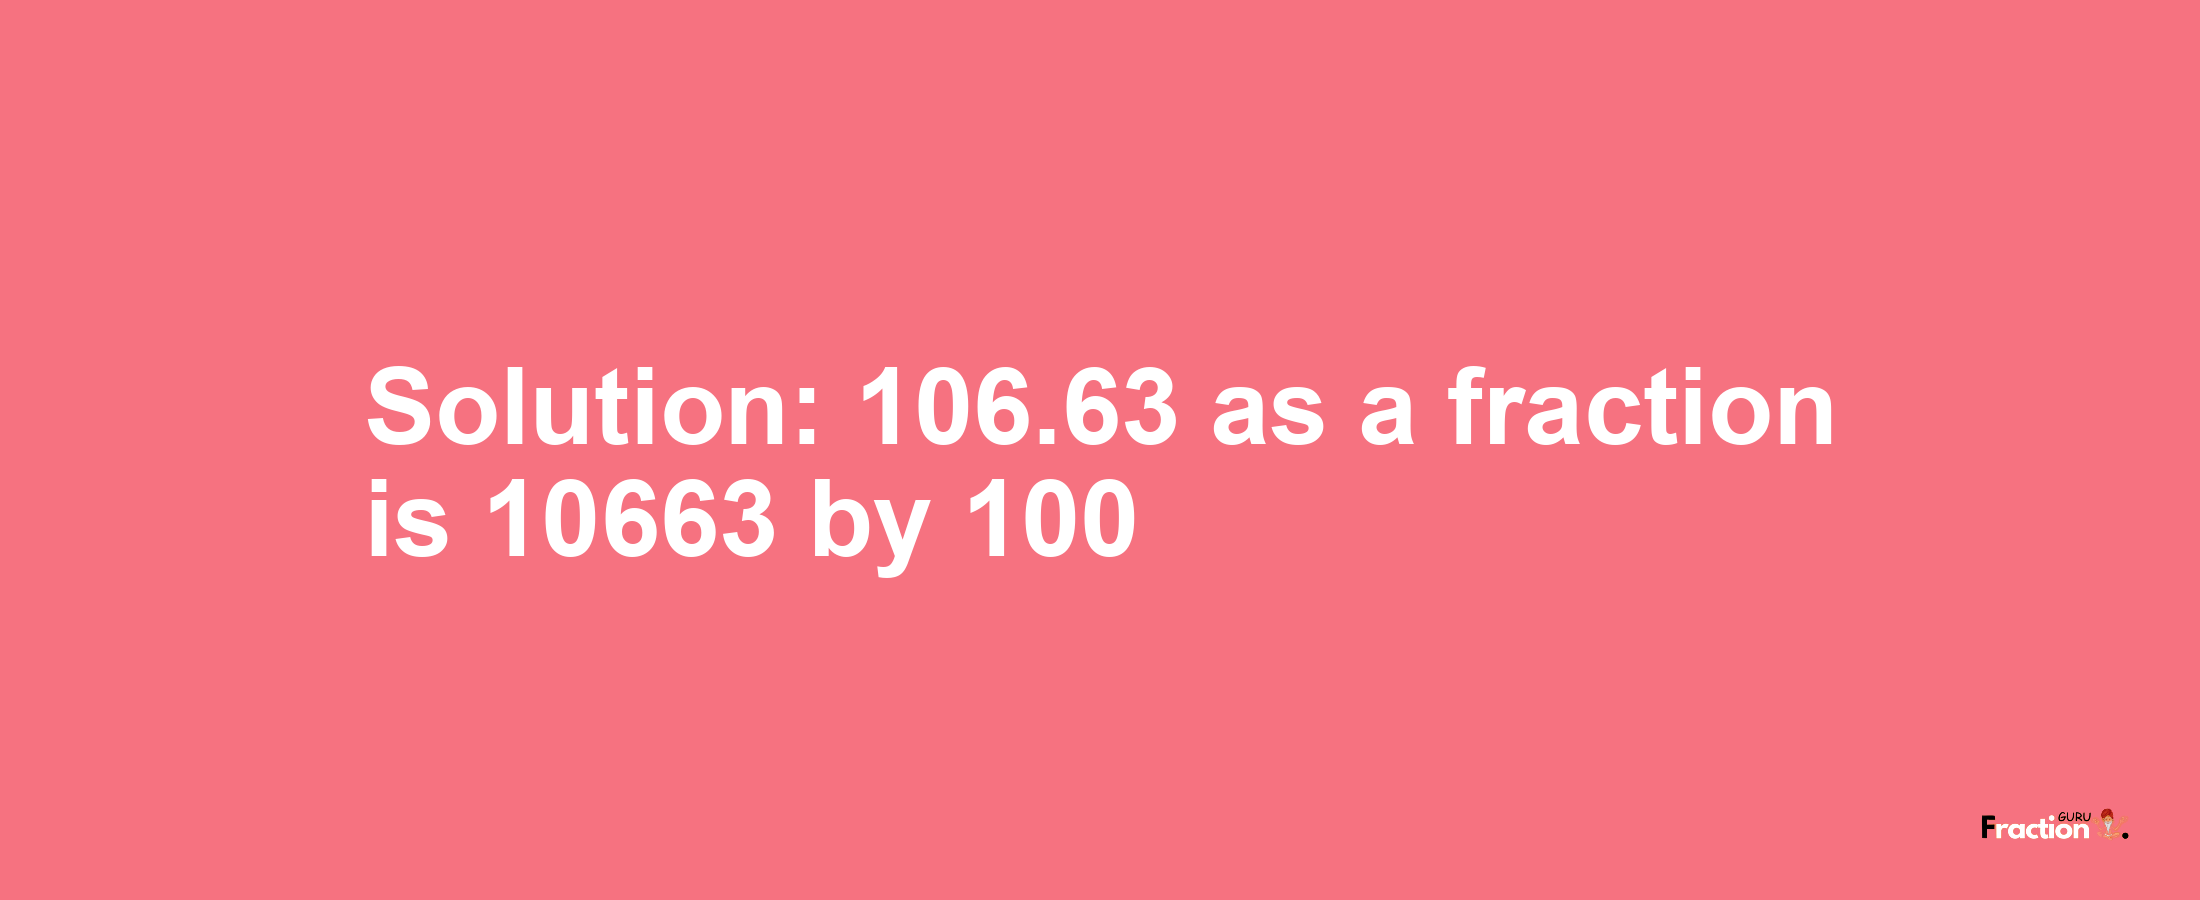 Solution:106.63 as a fraction is 10663/100